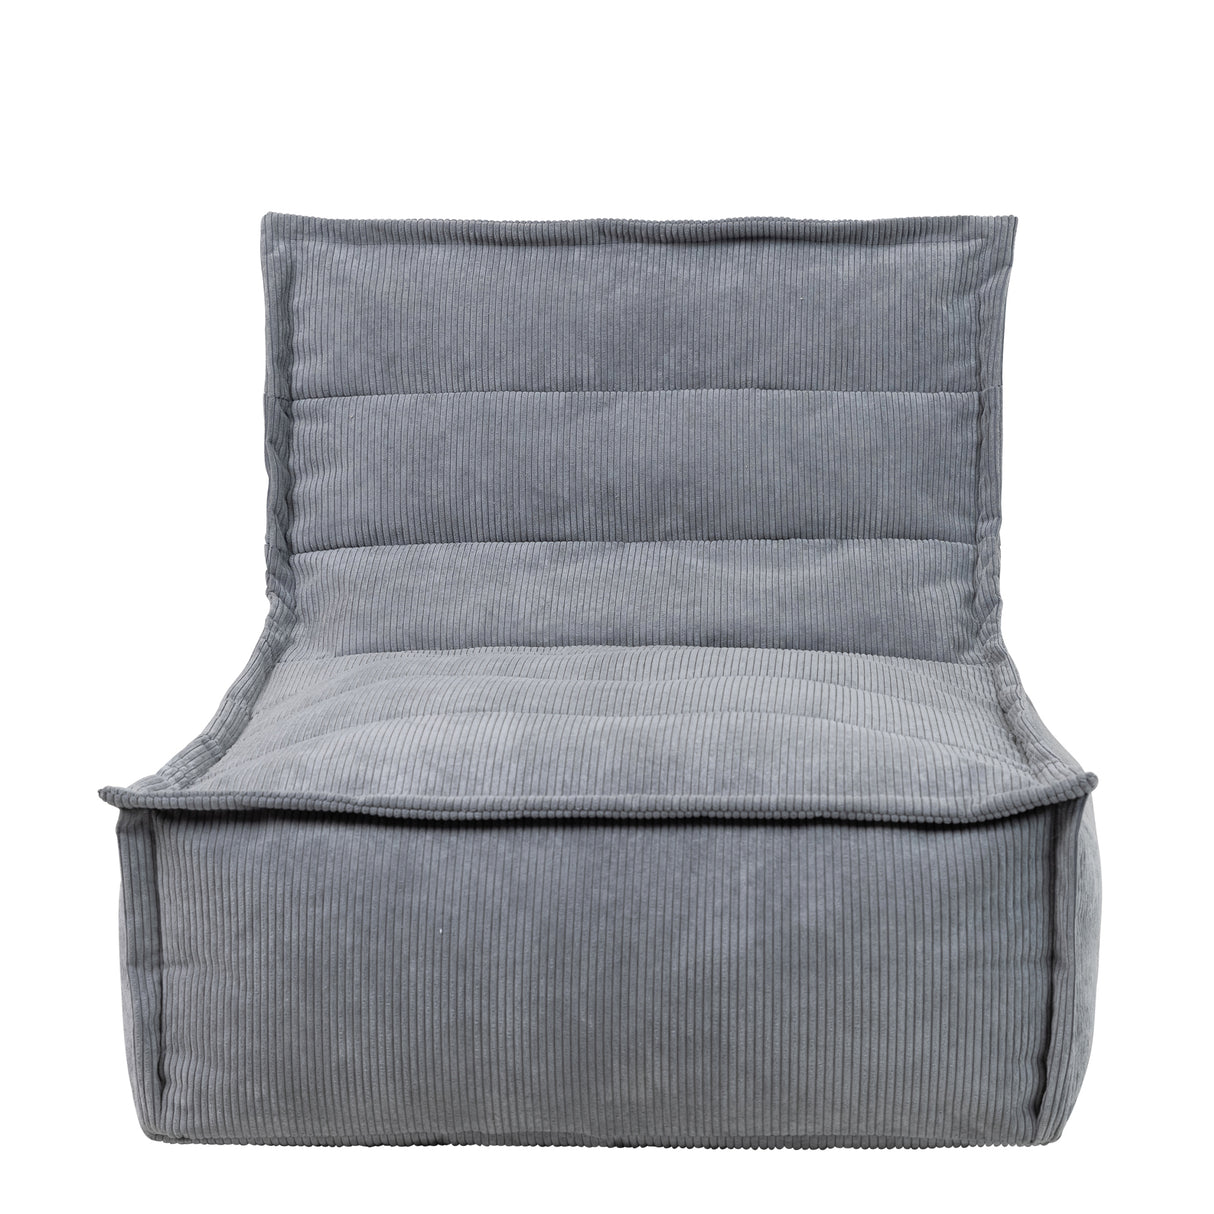 Cord Lounger - Charcoal Grey